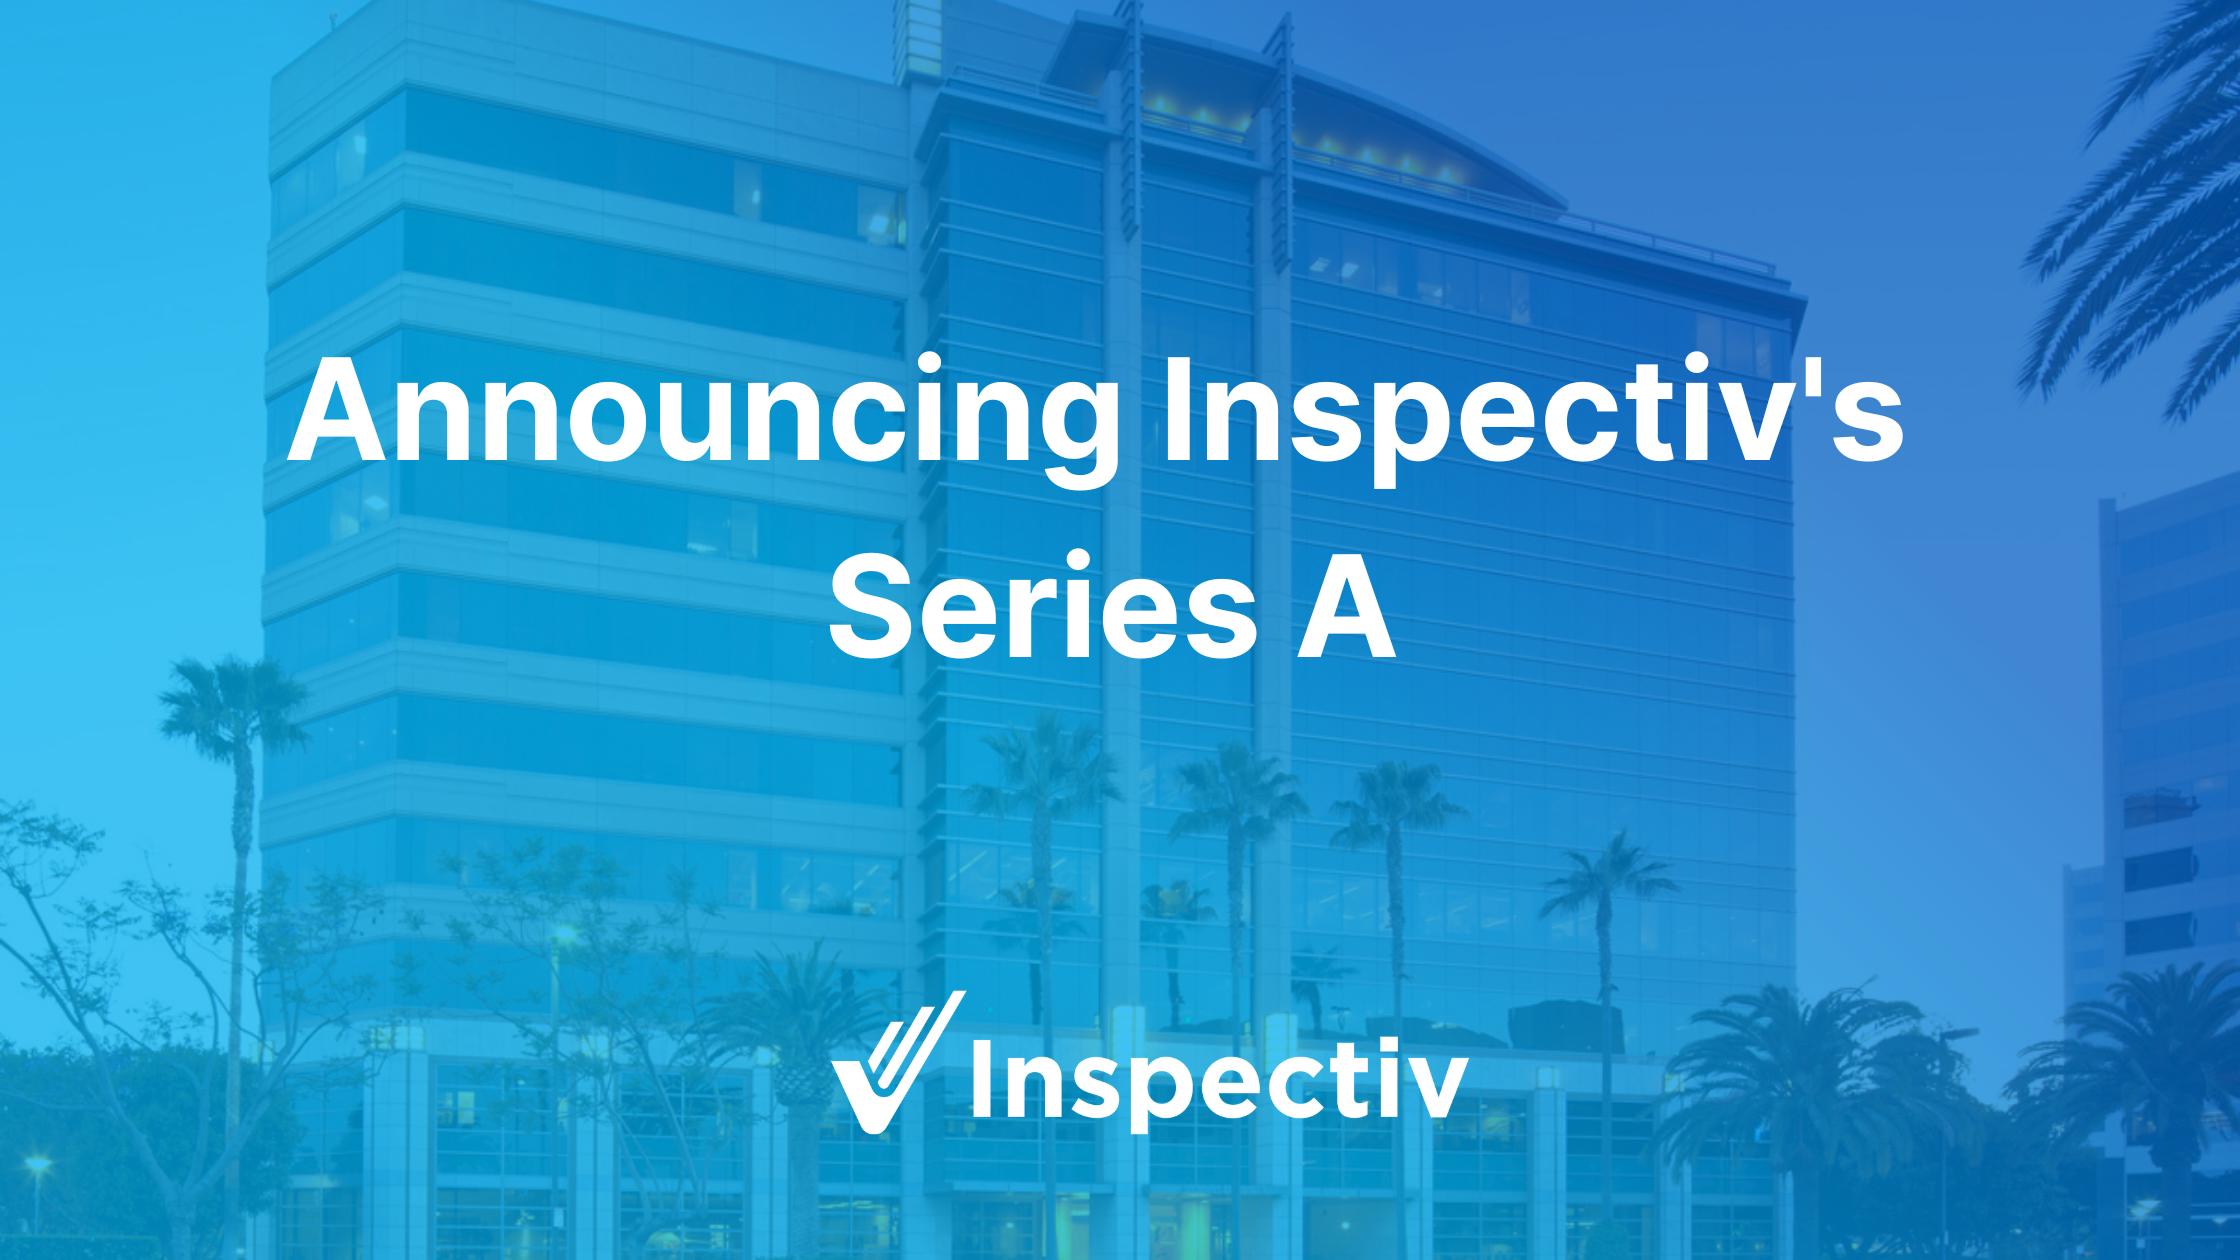 Announcing Inspectiv's Series A